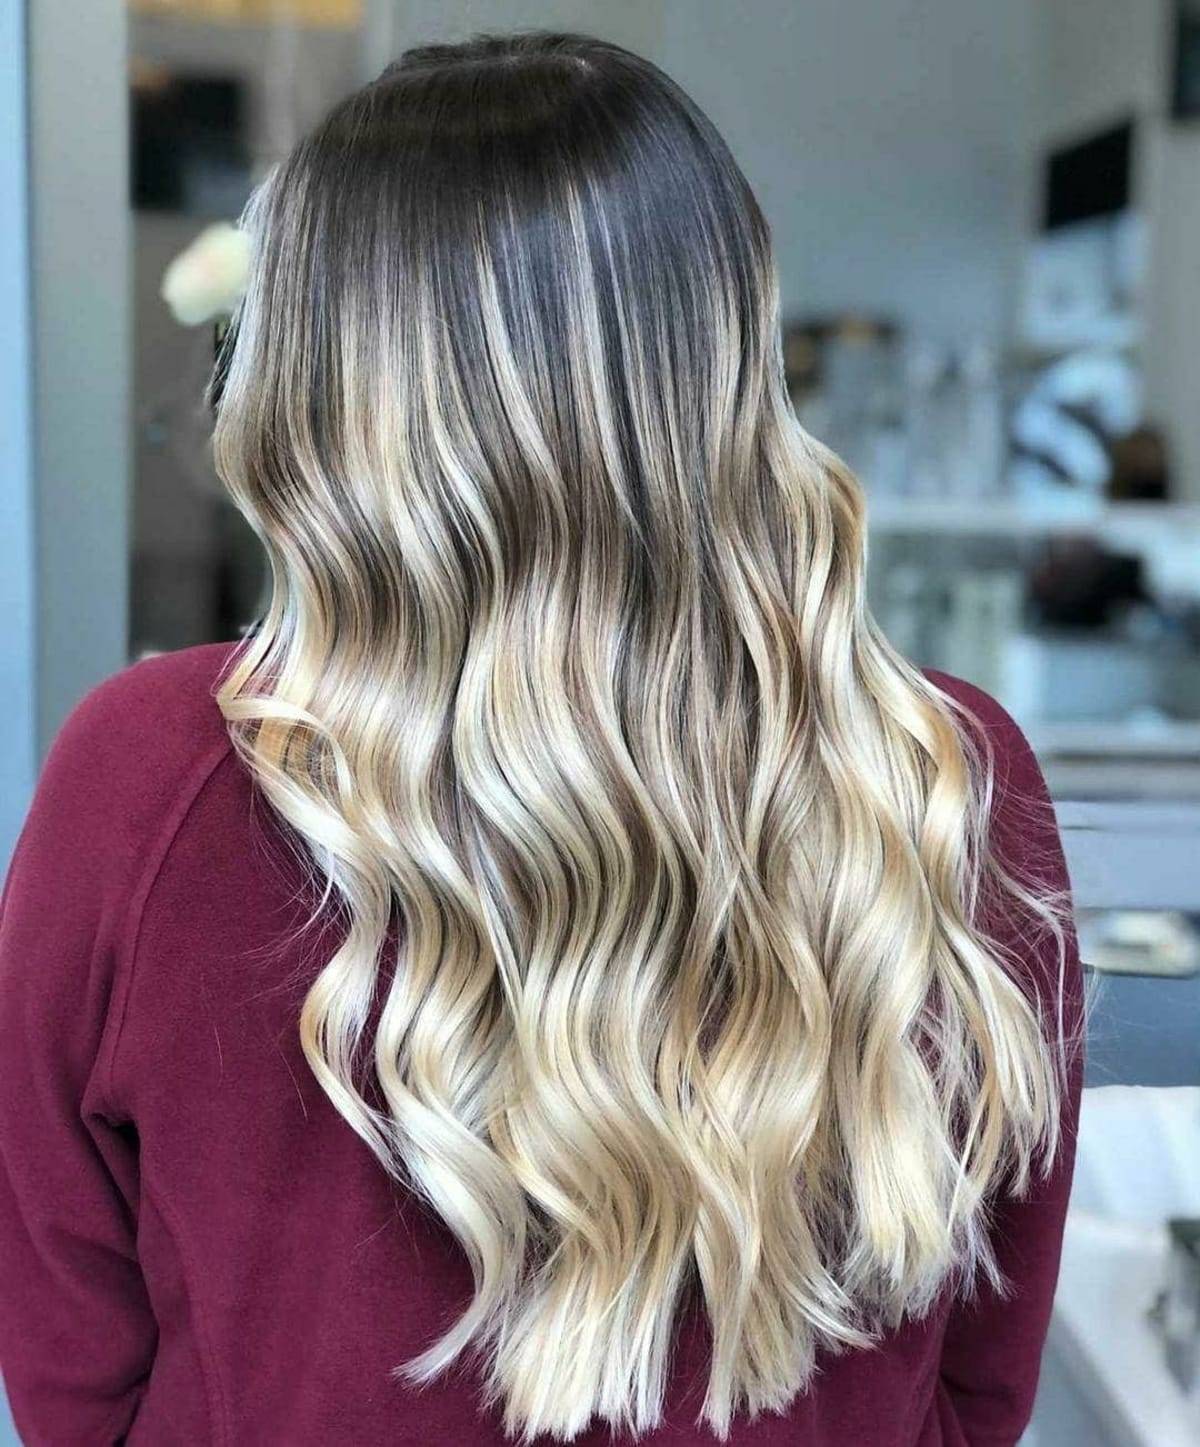 25 Stunning Blonde Hair Color Ideas Beautiful For Every Skin Tone - 211